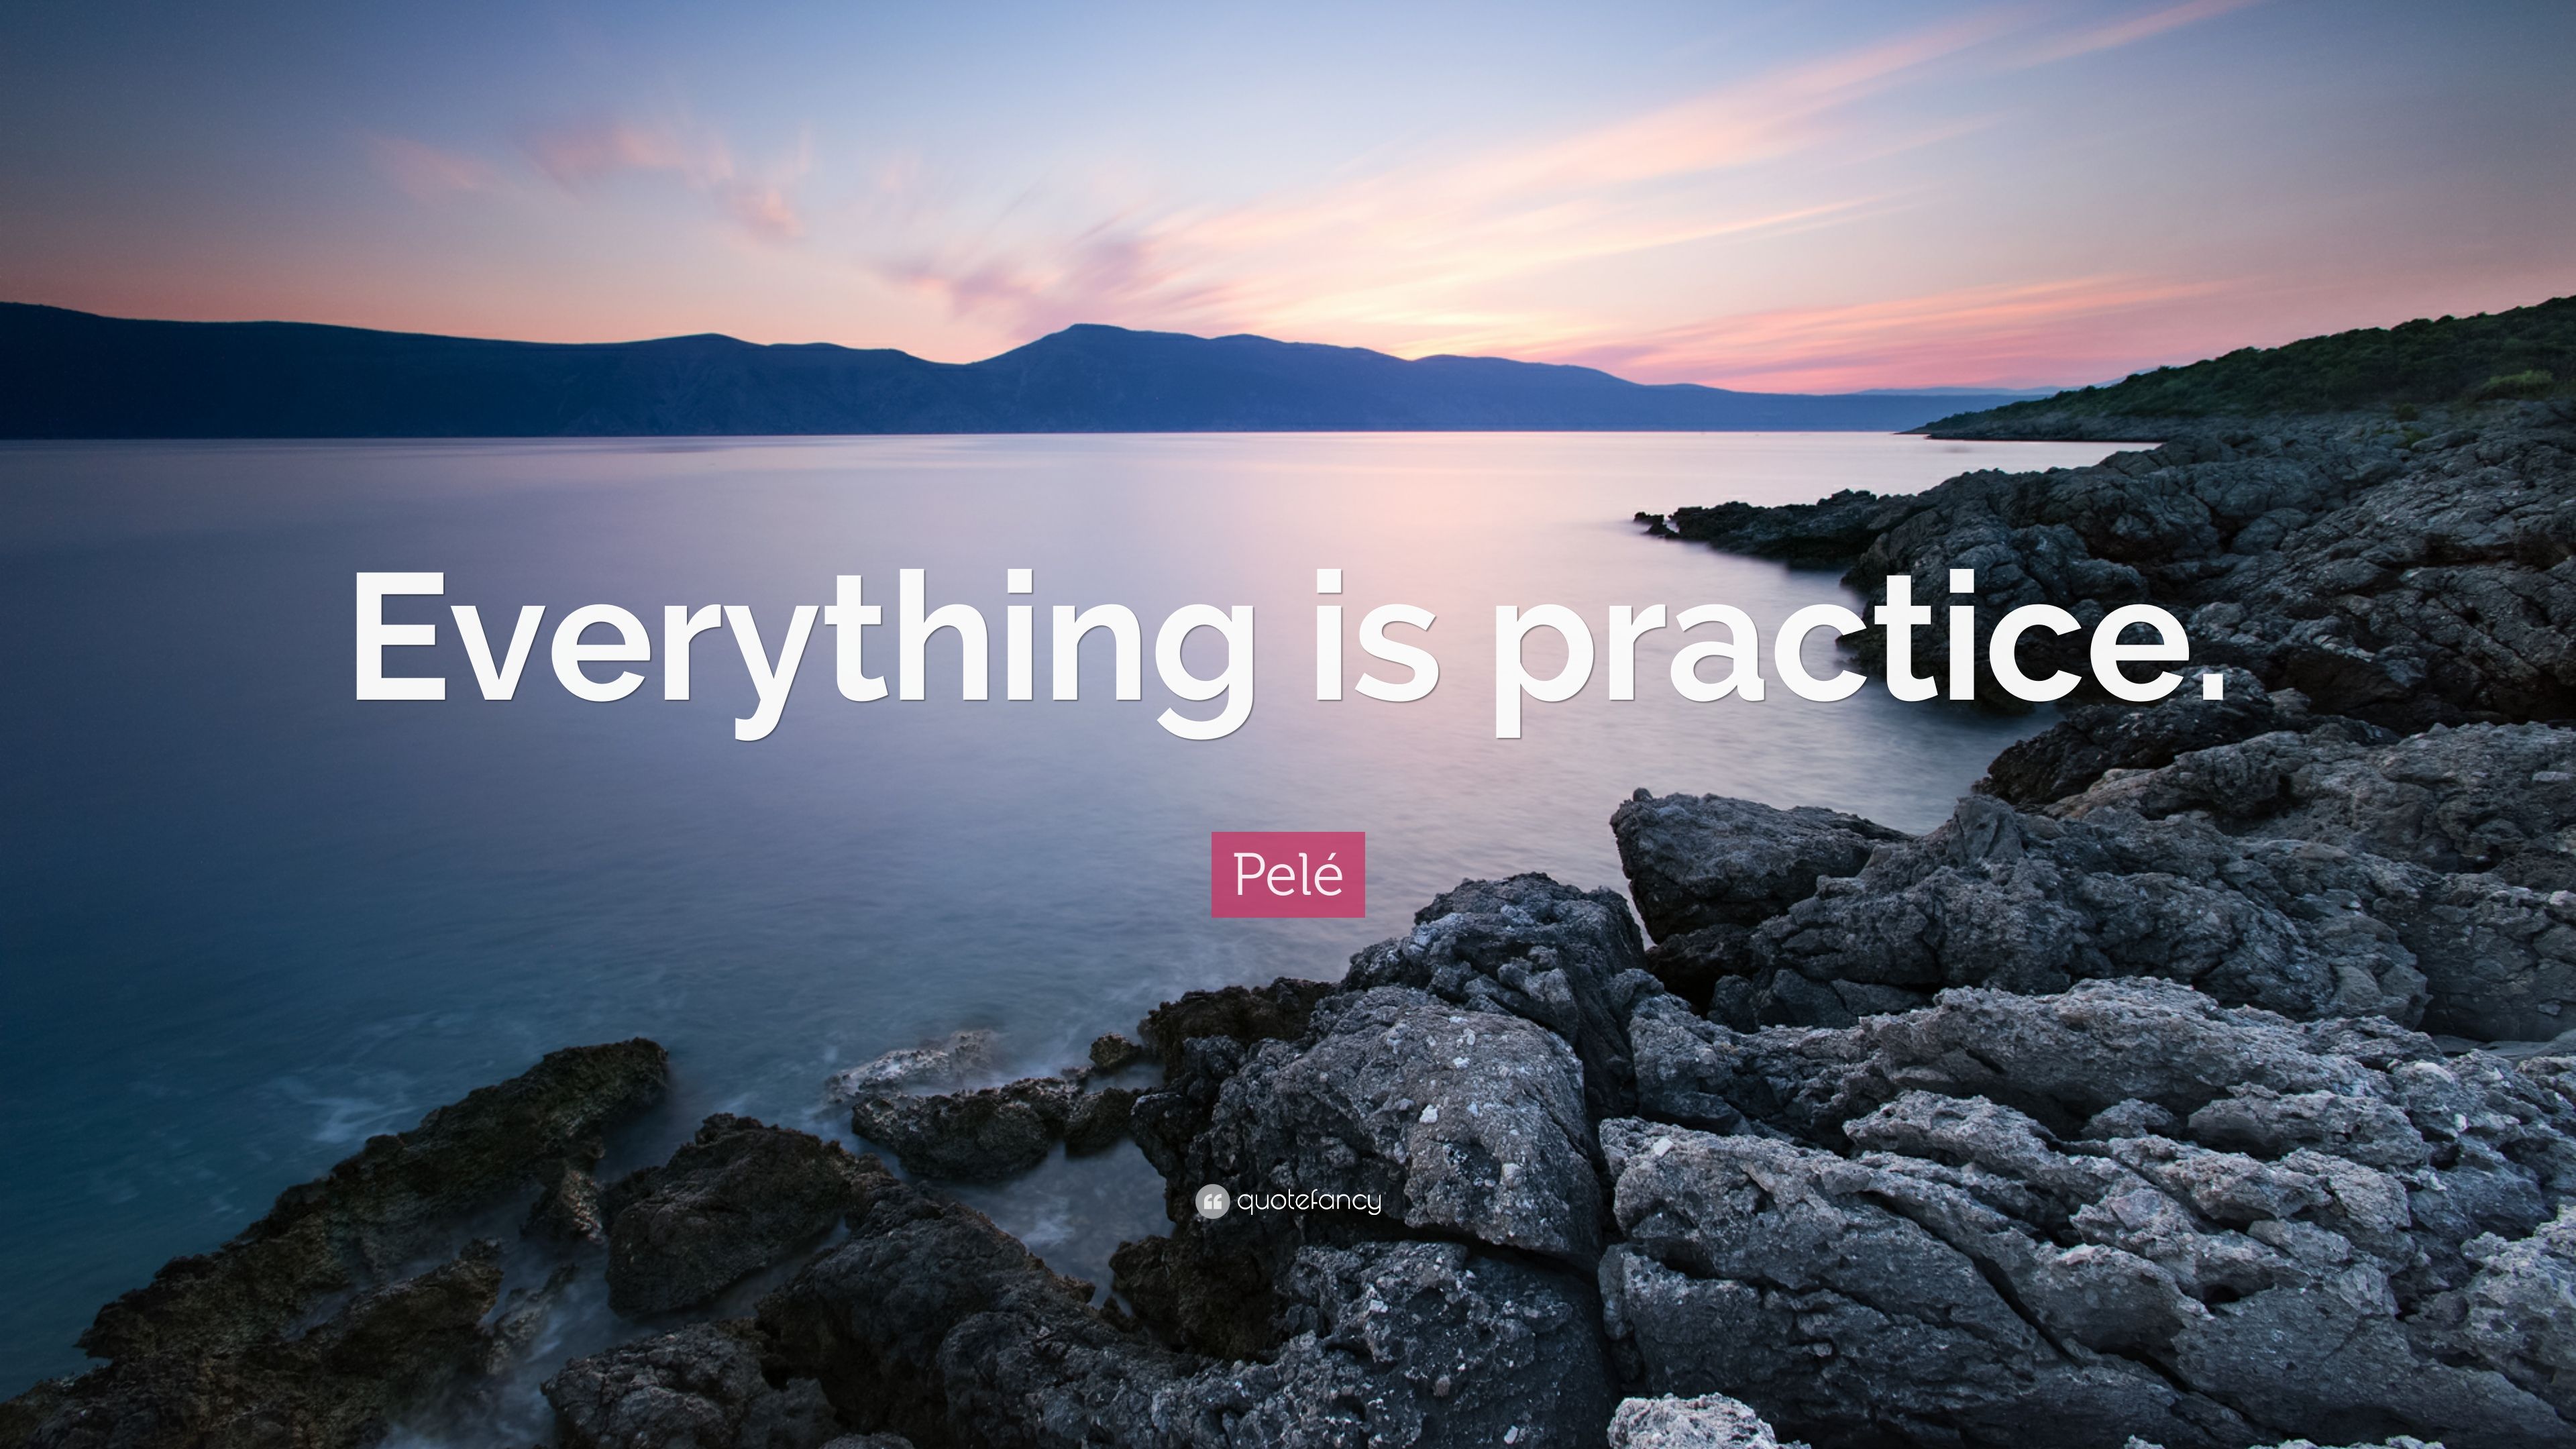 Pelé Quote: “Everything is practice.” (12 wallpaper)